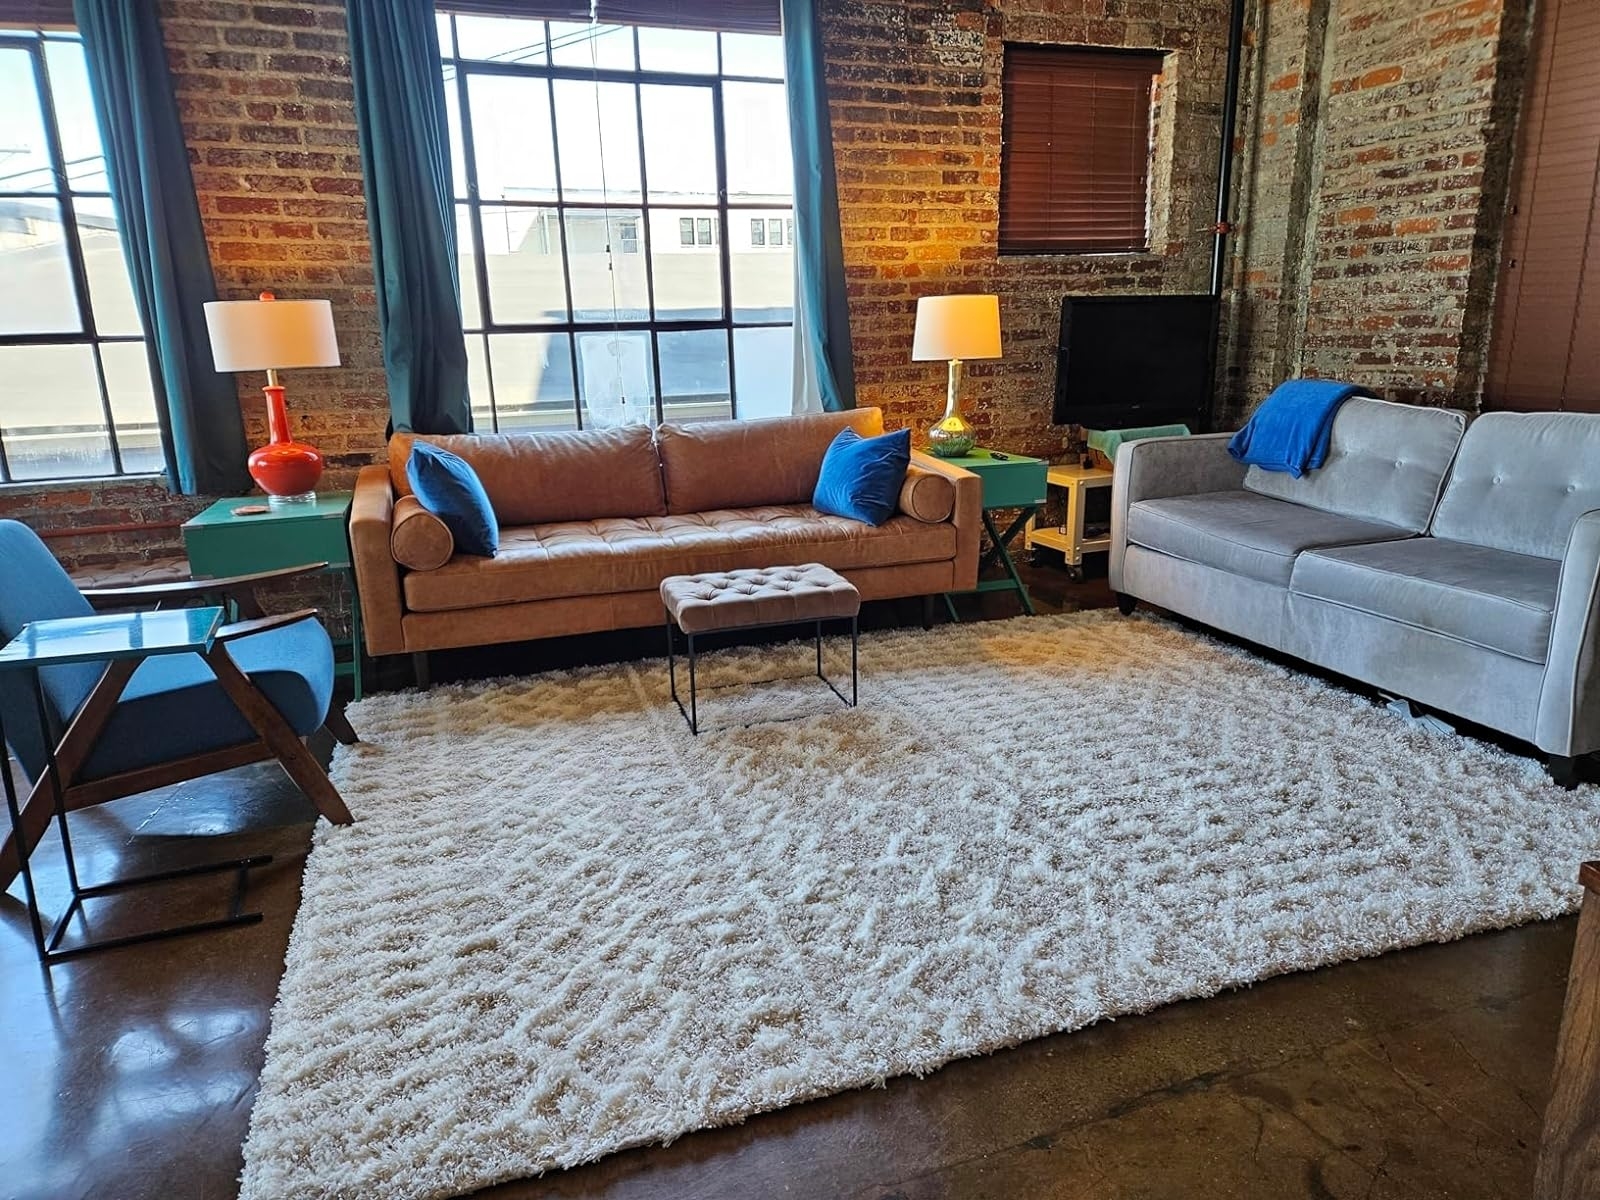 Loft living room with exposed brick walls, two sofas, a rug, and a TV